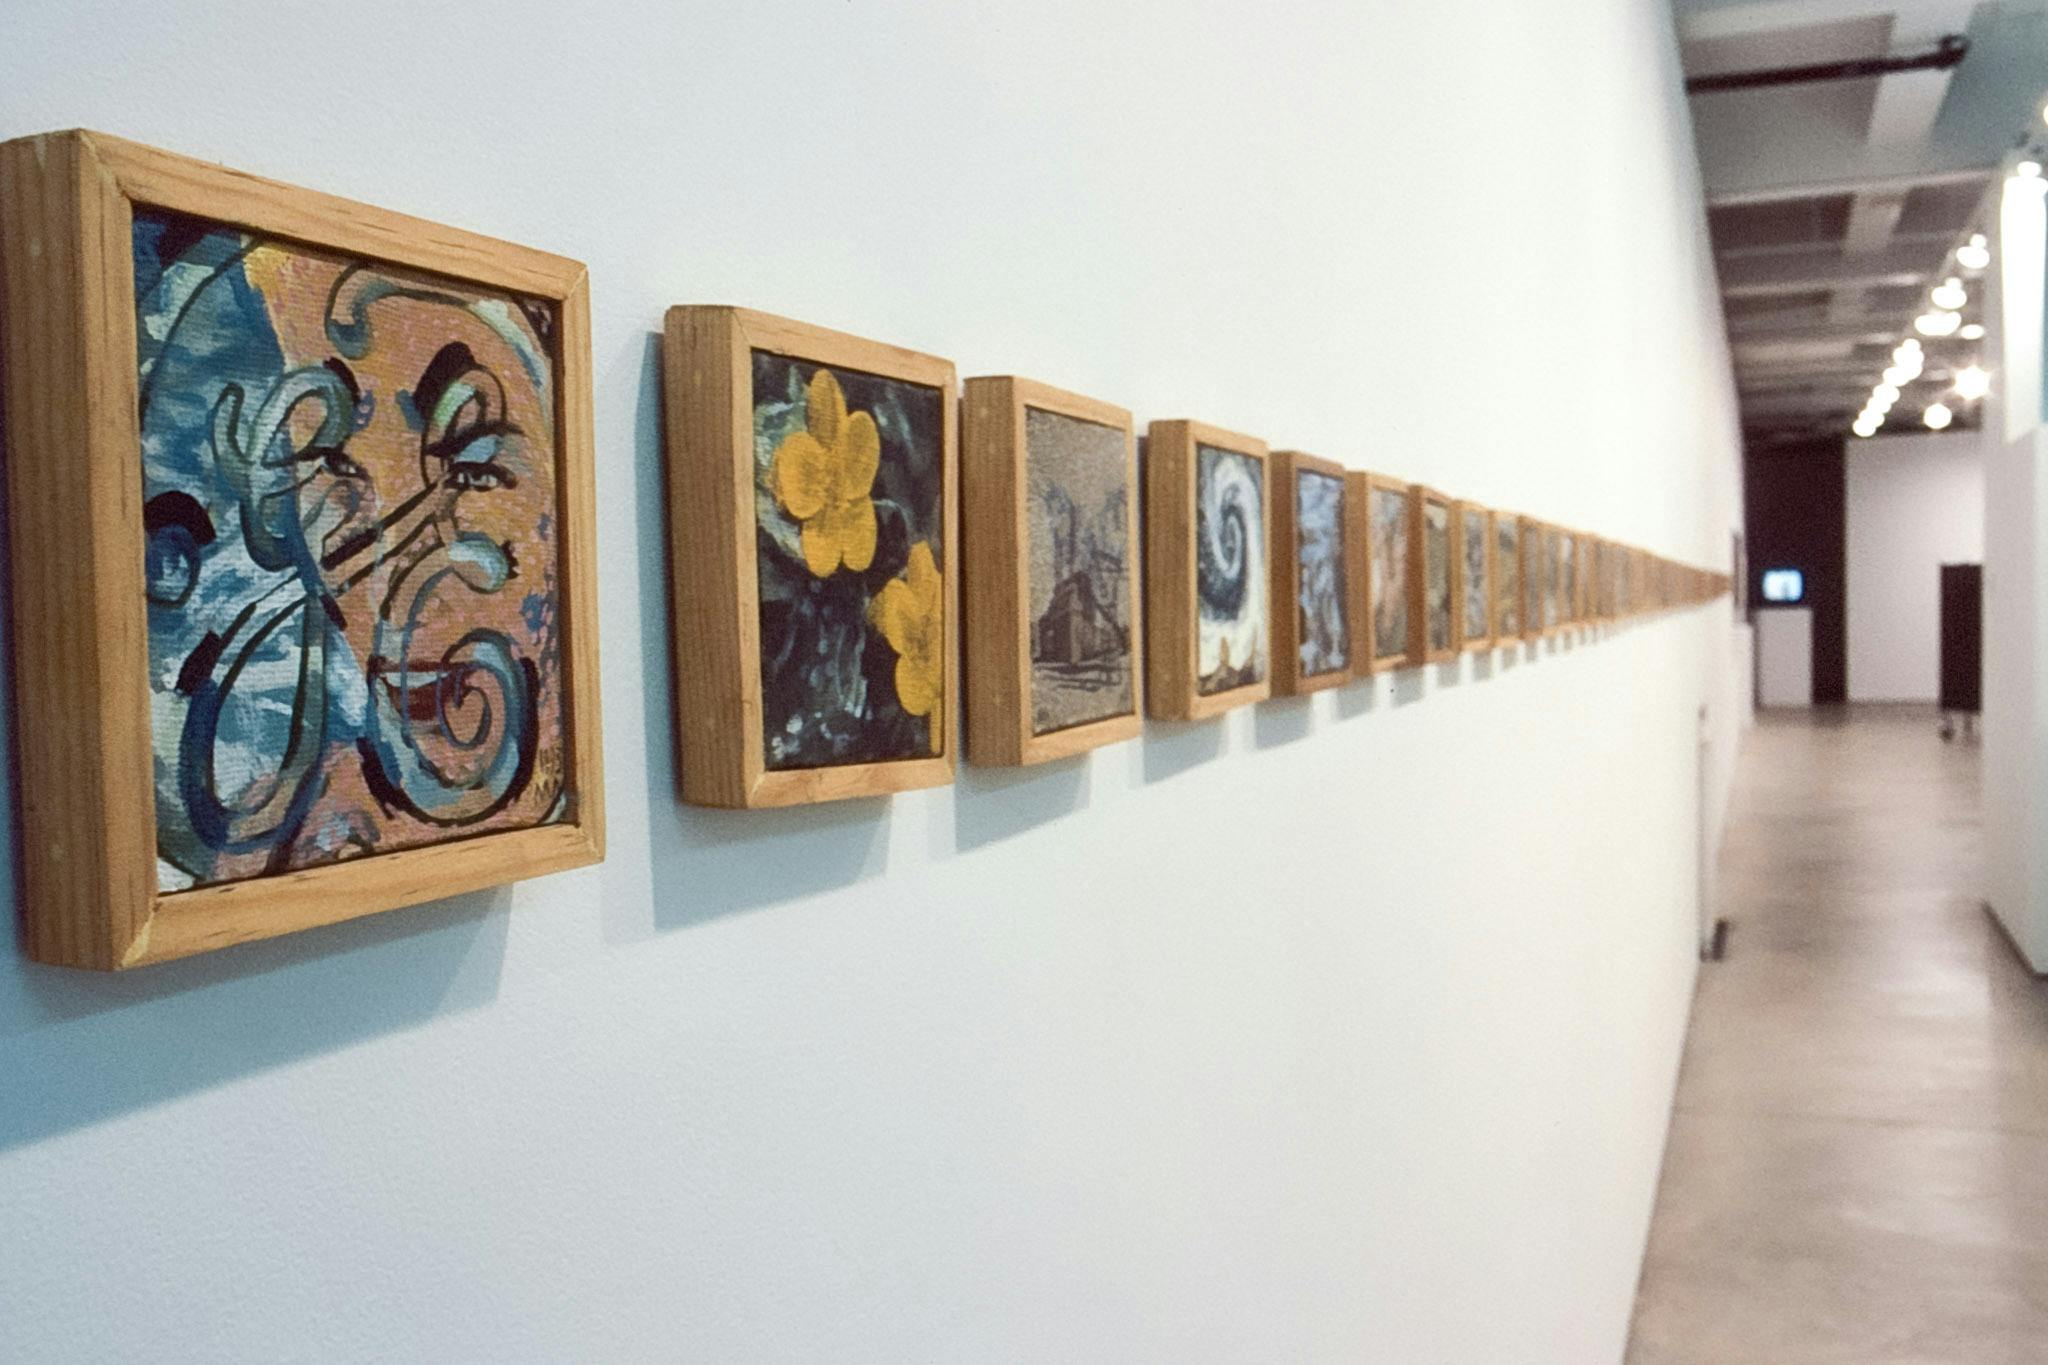 Multiple small-sized wooden framed paintings are mounted on the gallery wall. The one in the front depicts calligraphic lines that form a shape that resembles the capital letter H in a circle.